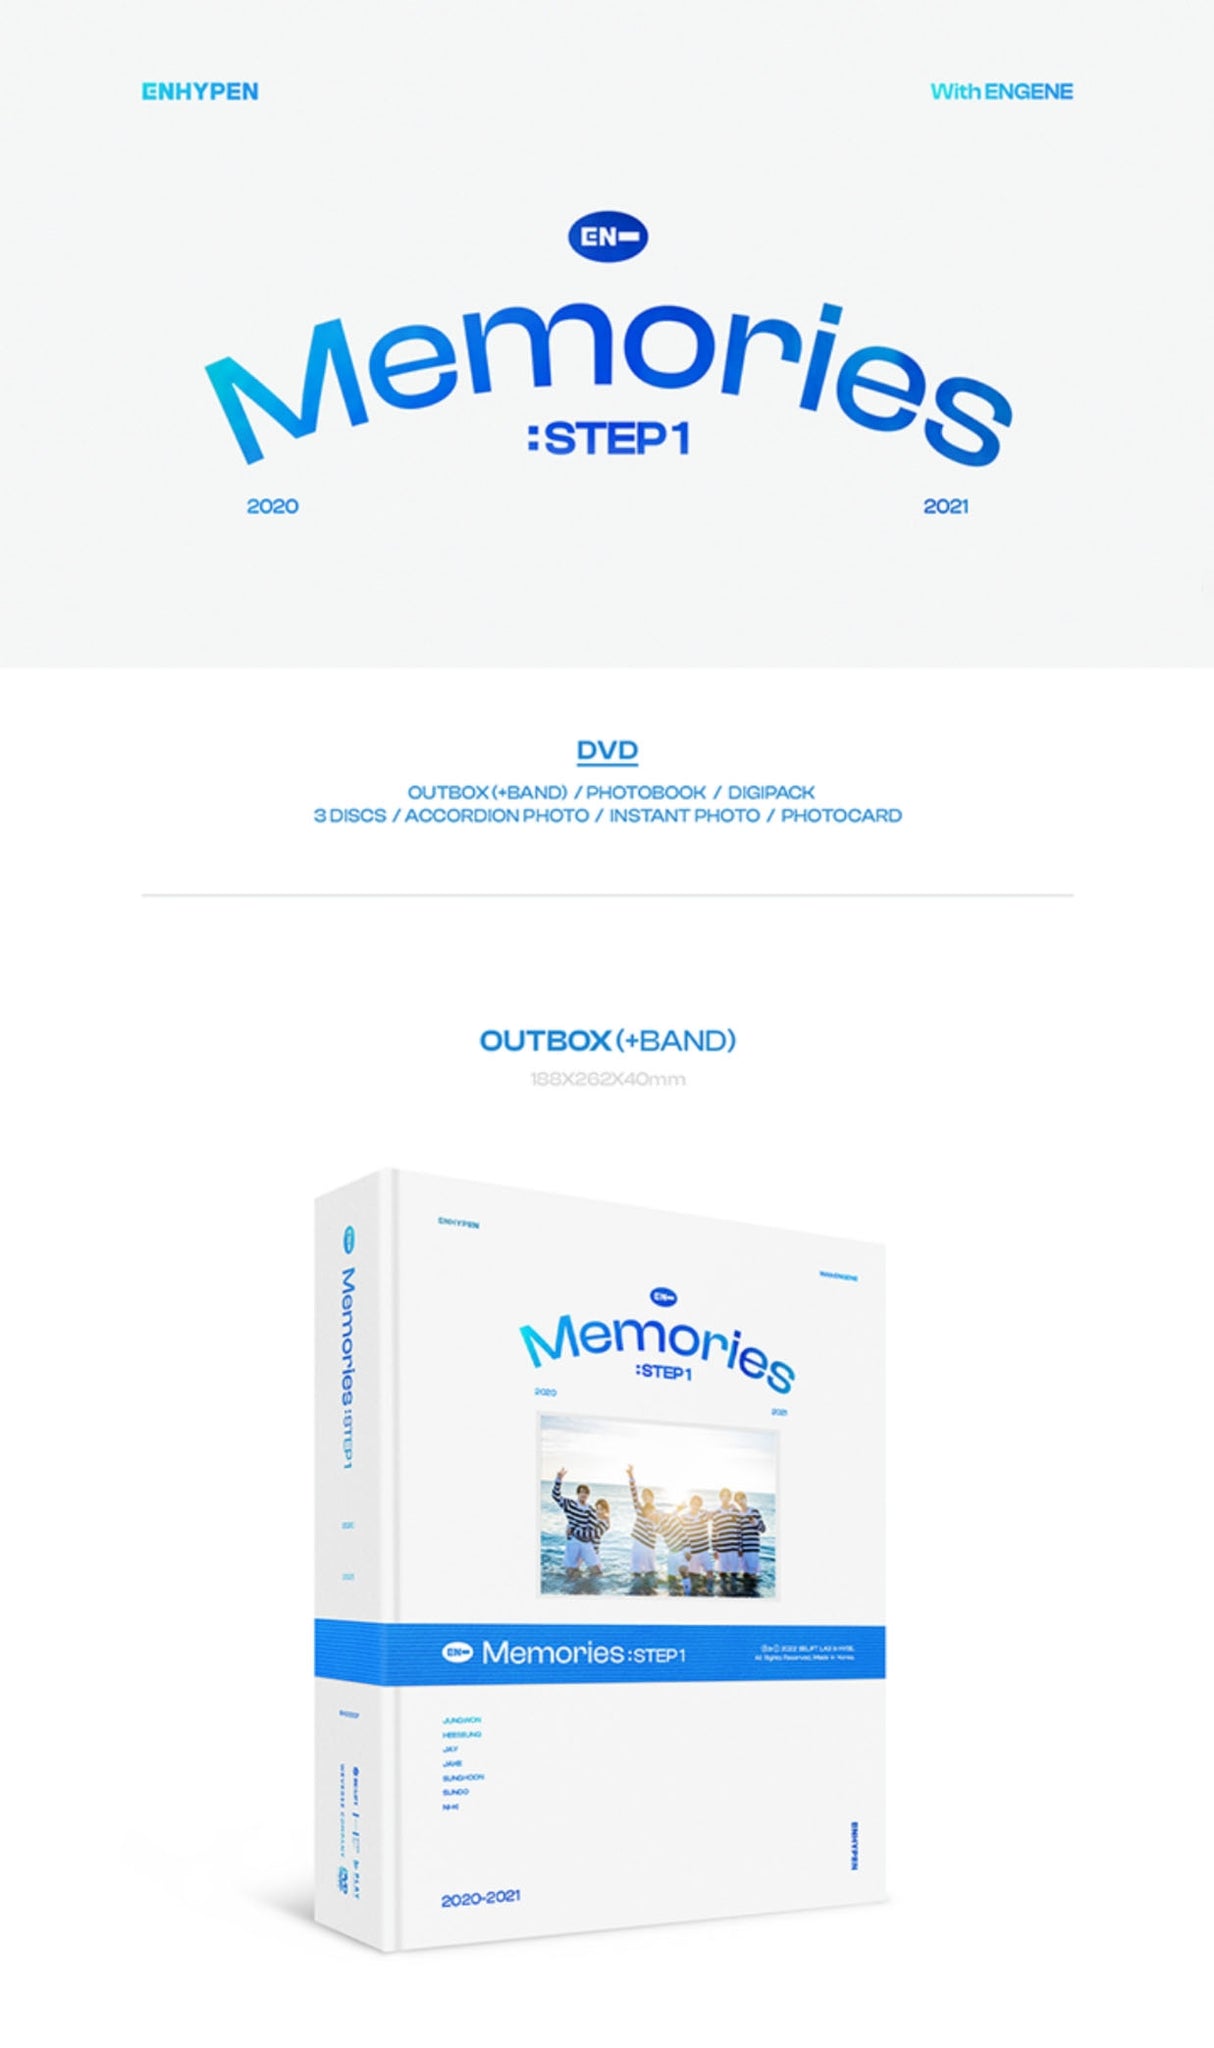 ENHYPEN Memories: STEP 1 DVD Inclusions Out Box Band